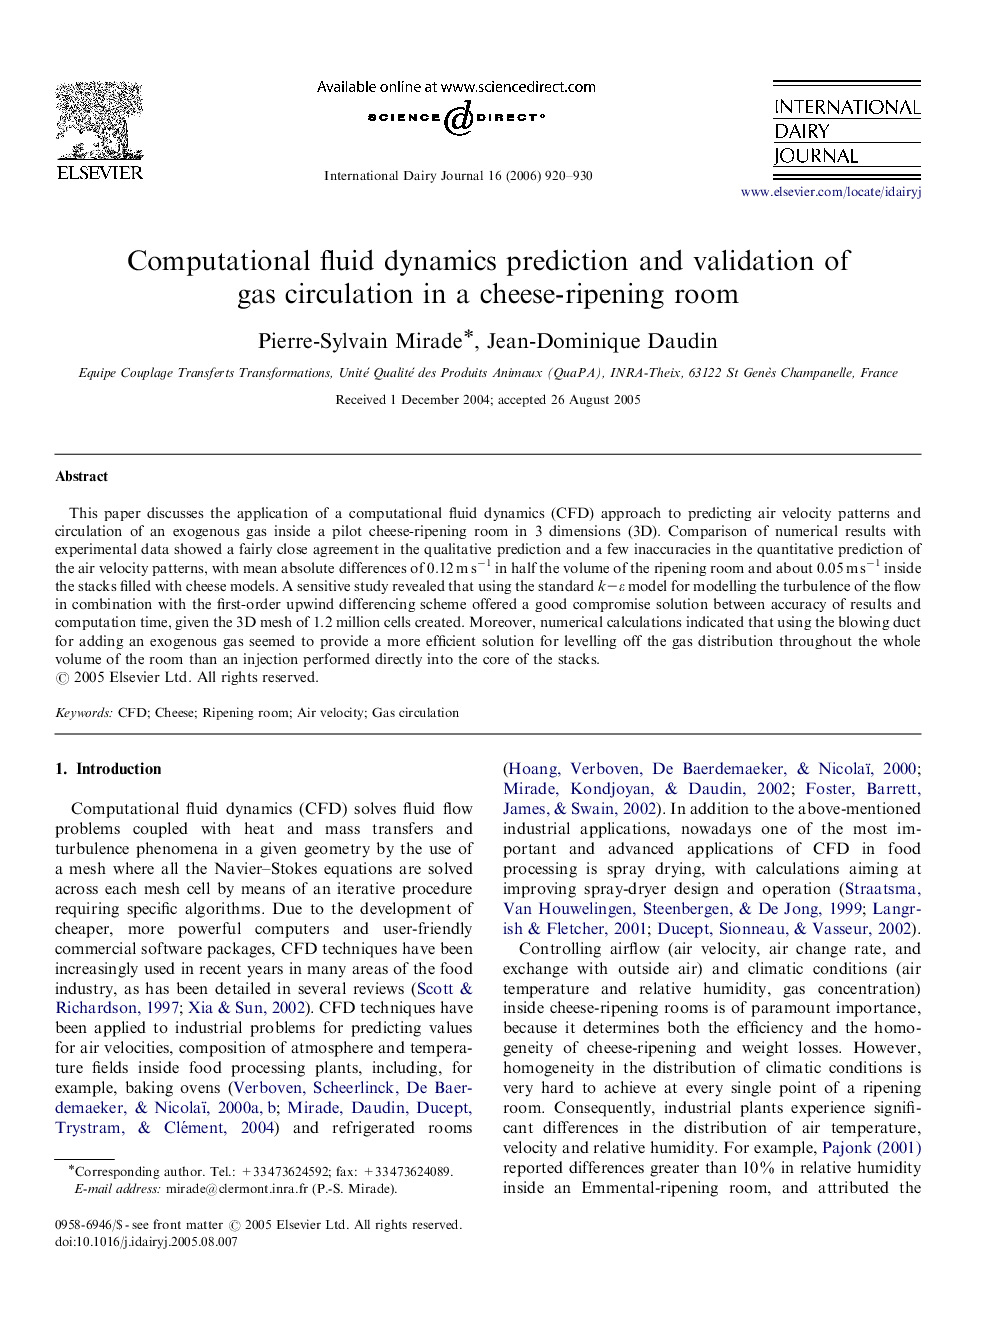 Computational fluid dynamics prediction and validation of gas circulation in a cheese-ripening room